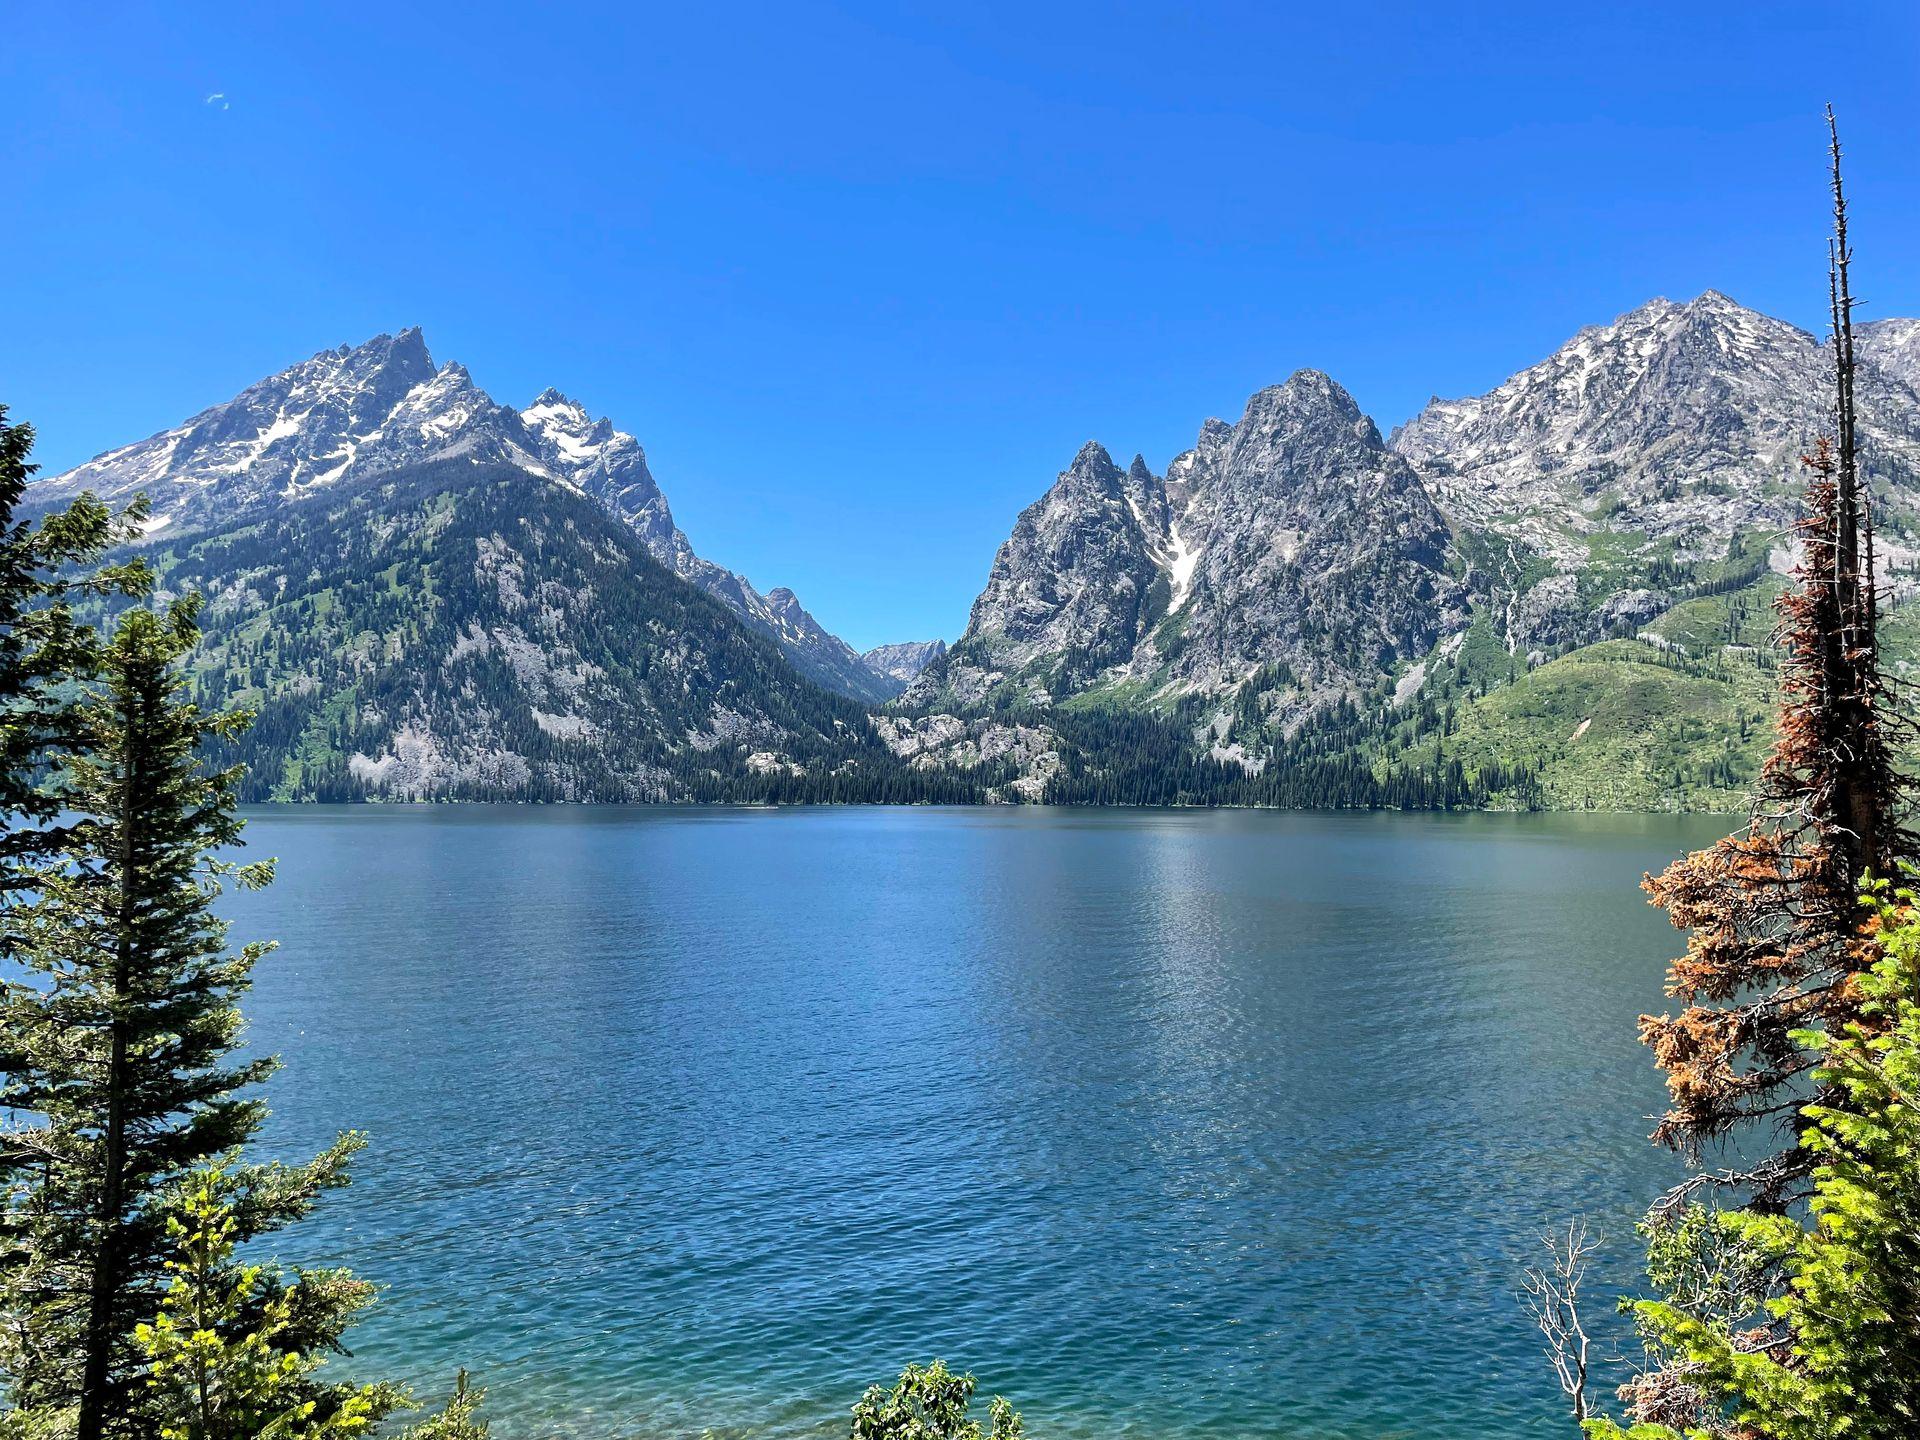 A view of Jenny Lake with beautiful mountains across the lake.